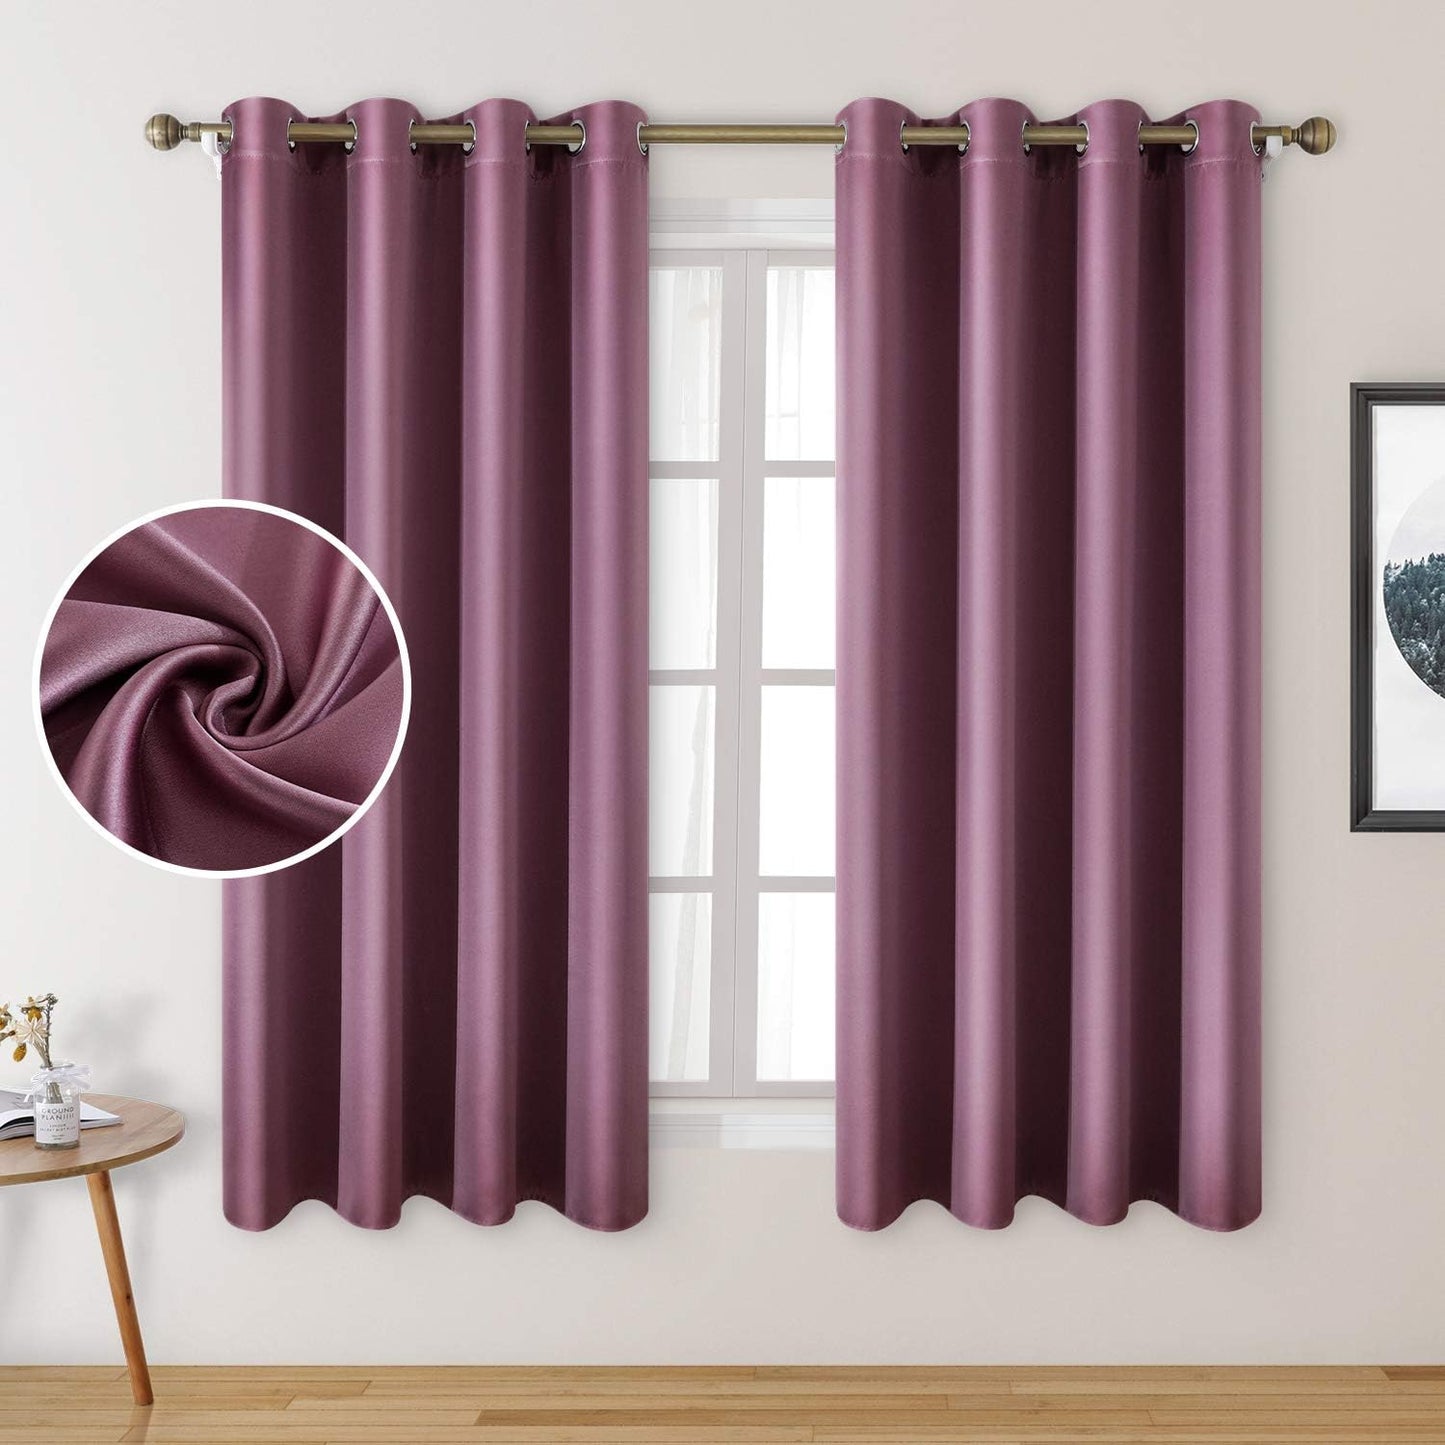 HOMEIDEAS Gold Blackout Curtains, Faux Silk for Bedroom 52 X 84 Inch Room Darkening Satin Thermal Insulated Drapes for Window, Indoor, Living Room, 2 Panels  HOMEIDEAS Lavender 52" X 63" 